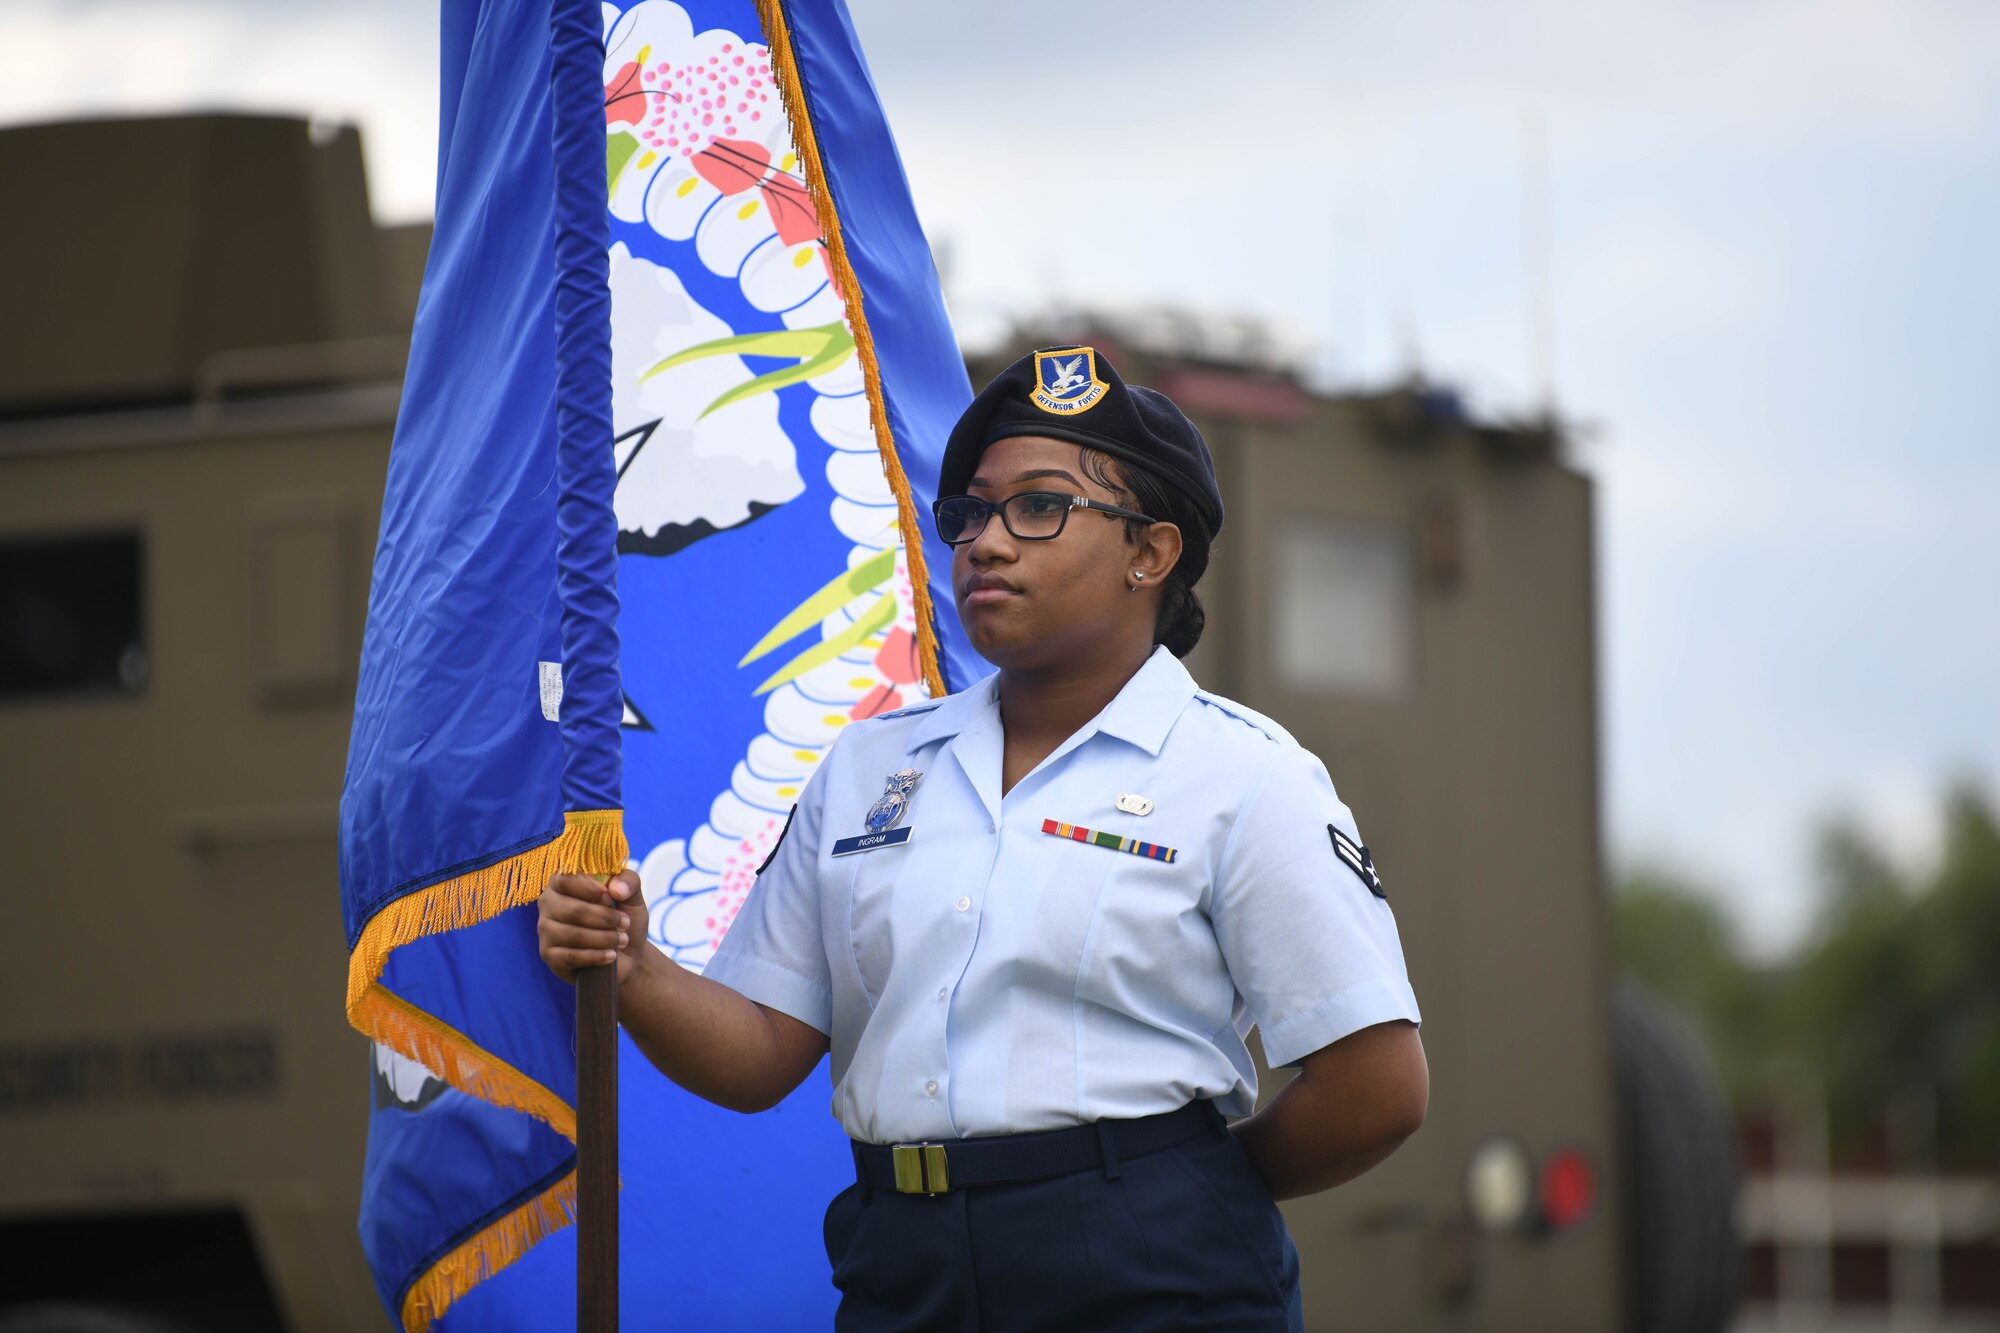 The ceremony signified the transition of command from Col. Peter Bonetti to Col. Catherine Barrington. (U.S. Air Force photo by Airman 1st Class Darius Frazier)